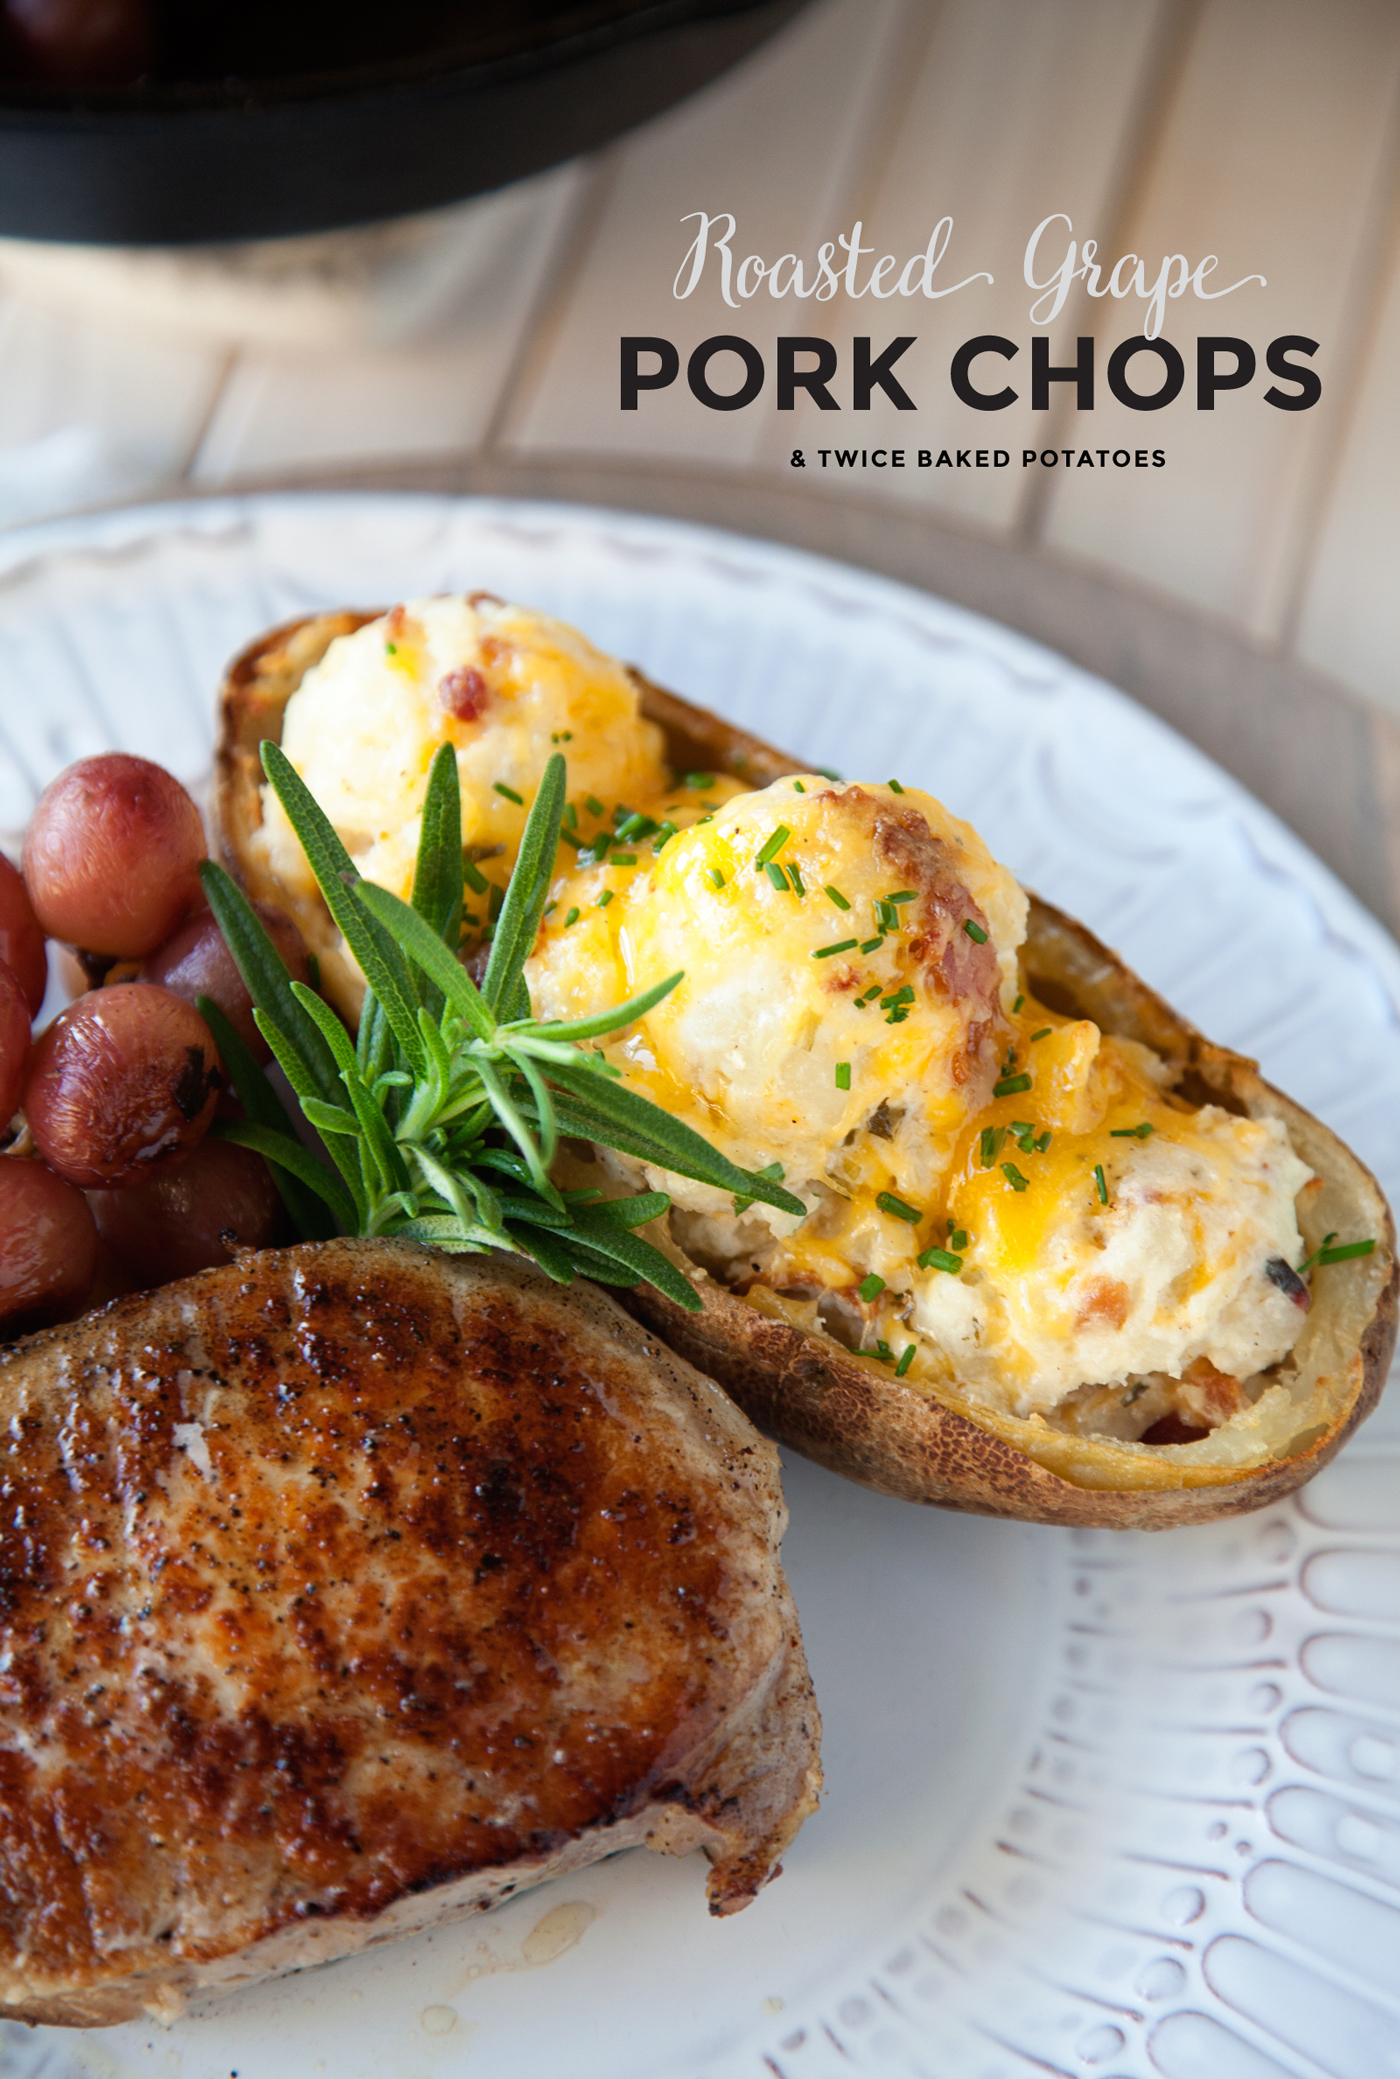 Roasted-Pork-Chop-with-Grapes-and-Twice-Baked-Potatoes-2